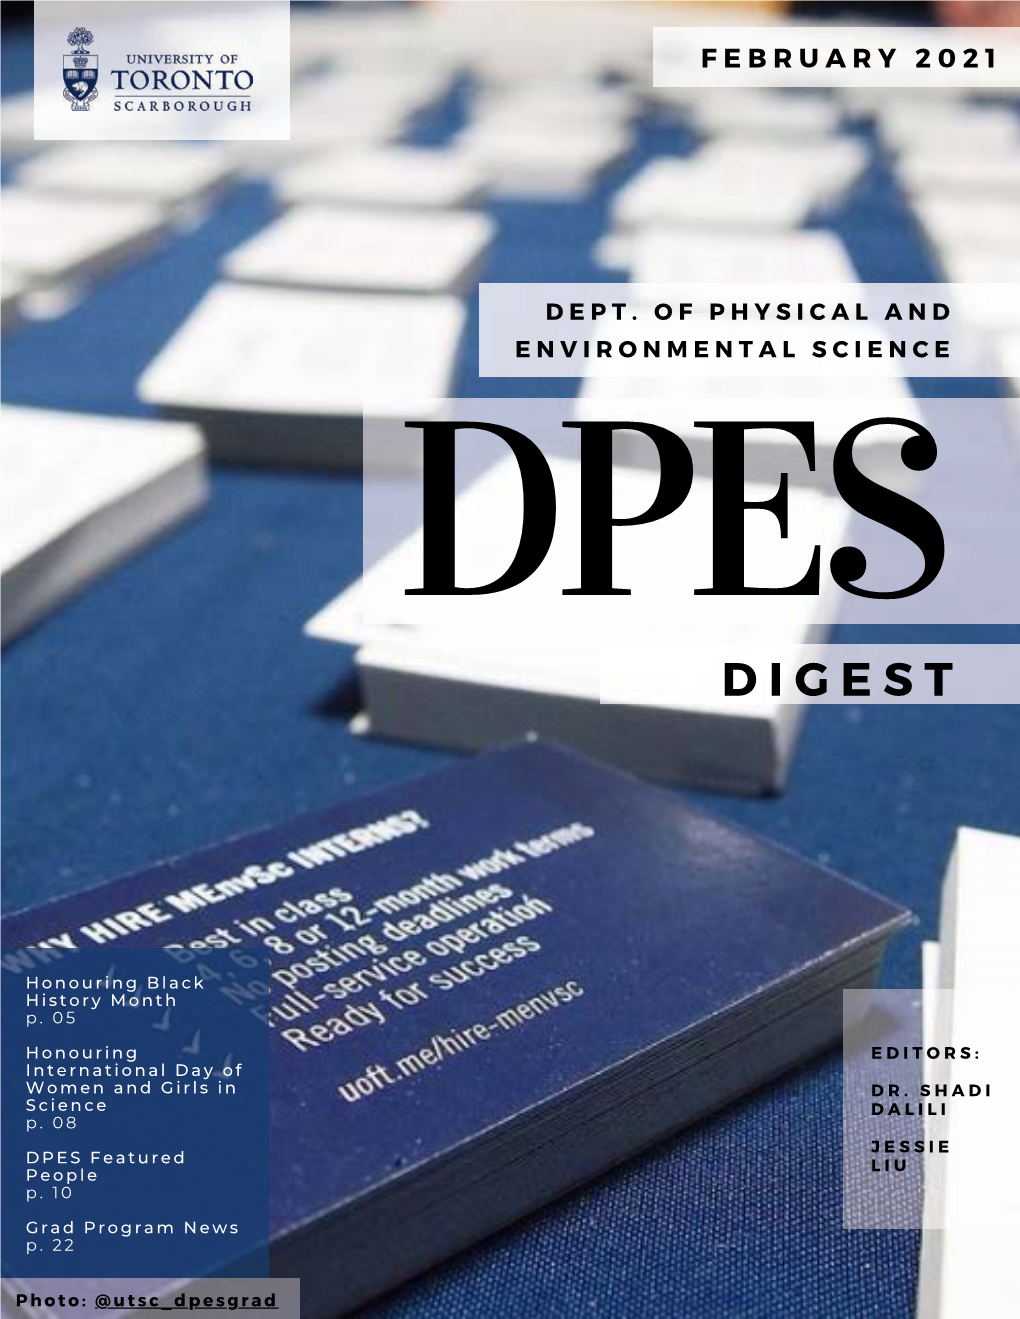 February 2021 About Me: Hello! My Name Is Jessie Liu and I Have Been the Editor of the DPES Digest for the Past Three Issues